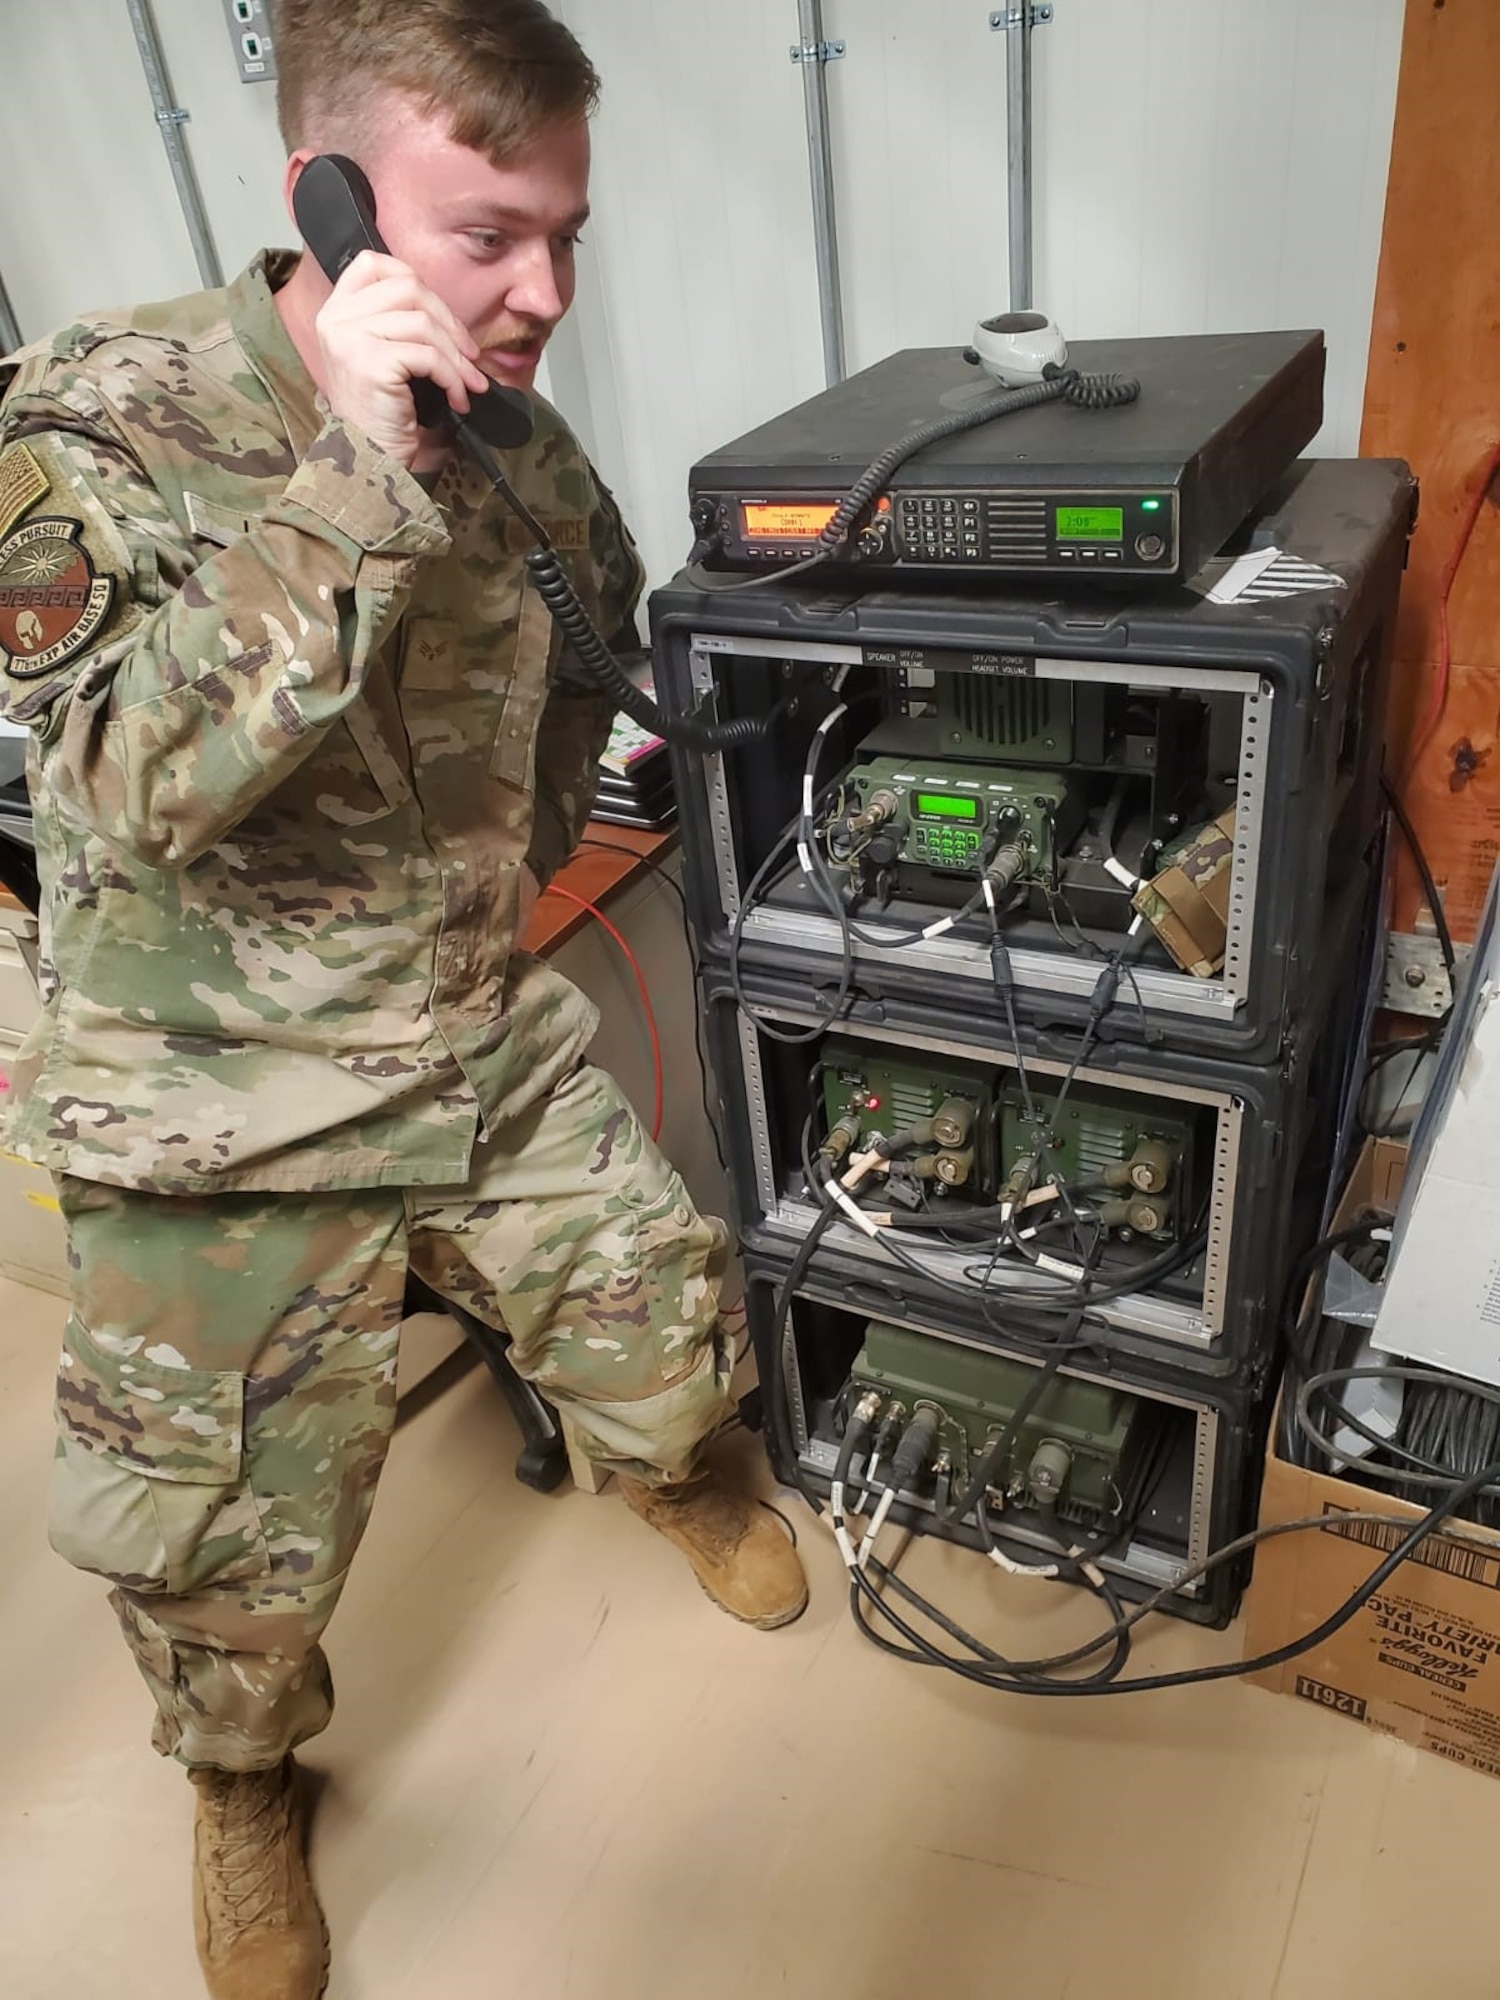 Senior Airman Jesse Lee, 776th Expeditionary Air Base Squadron radio and satellite communications technician, talks to another player in Latvia using high frequency (HF) radio calls during Noble Skywave Global HF competition at Chabelley Airfield, Djibouti, Oct 27, 2021. Noble Skywave is an annual competition hosted by the Canadian Armed Forces to test and strengthen expertise in HF radio communications.
(U.S. Air Force Courtesy Photo)